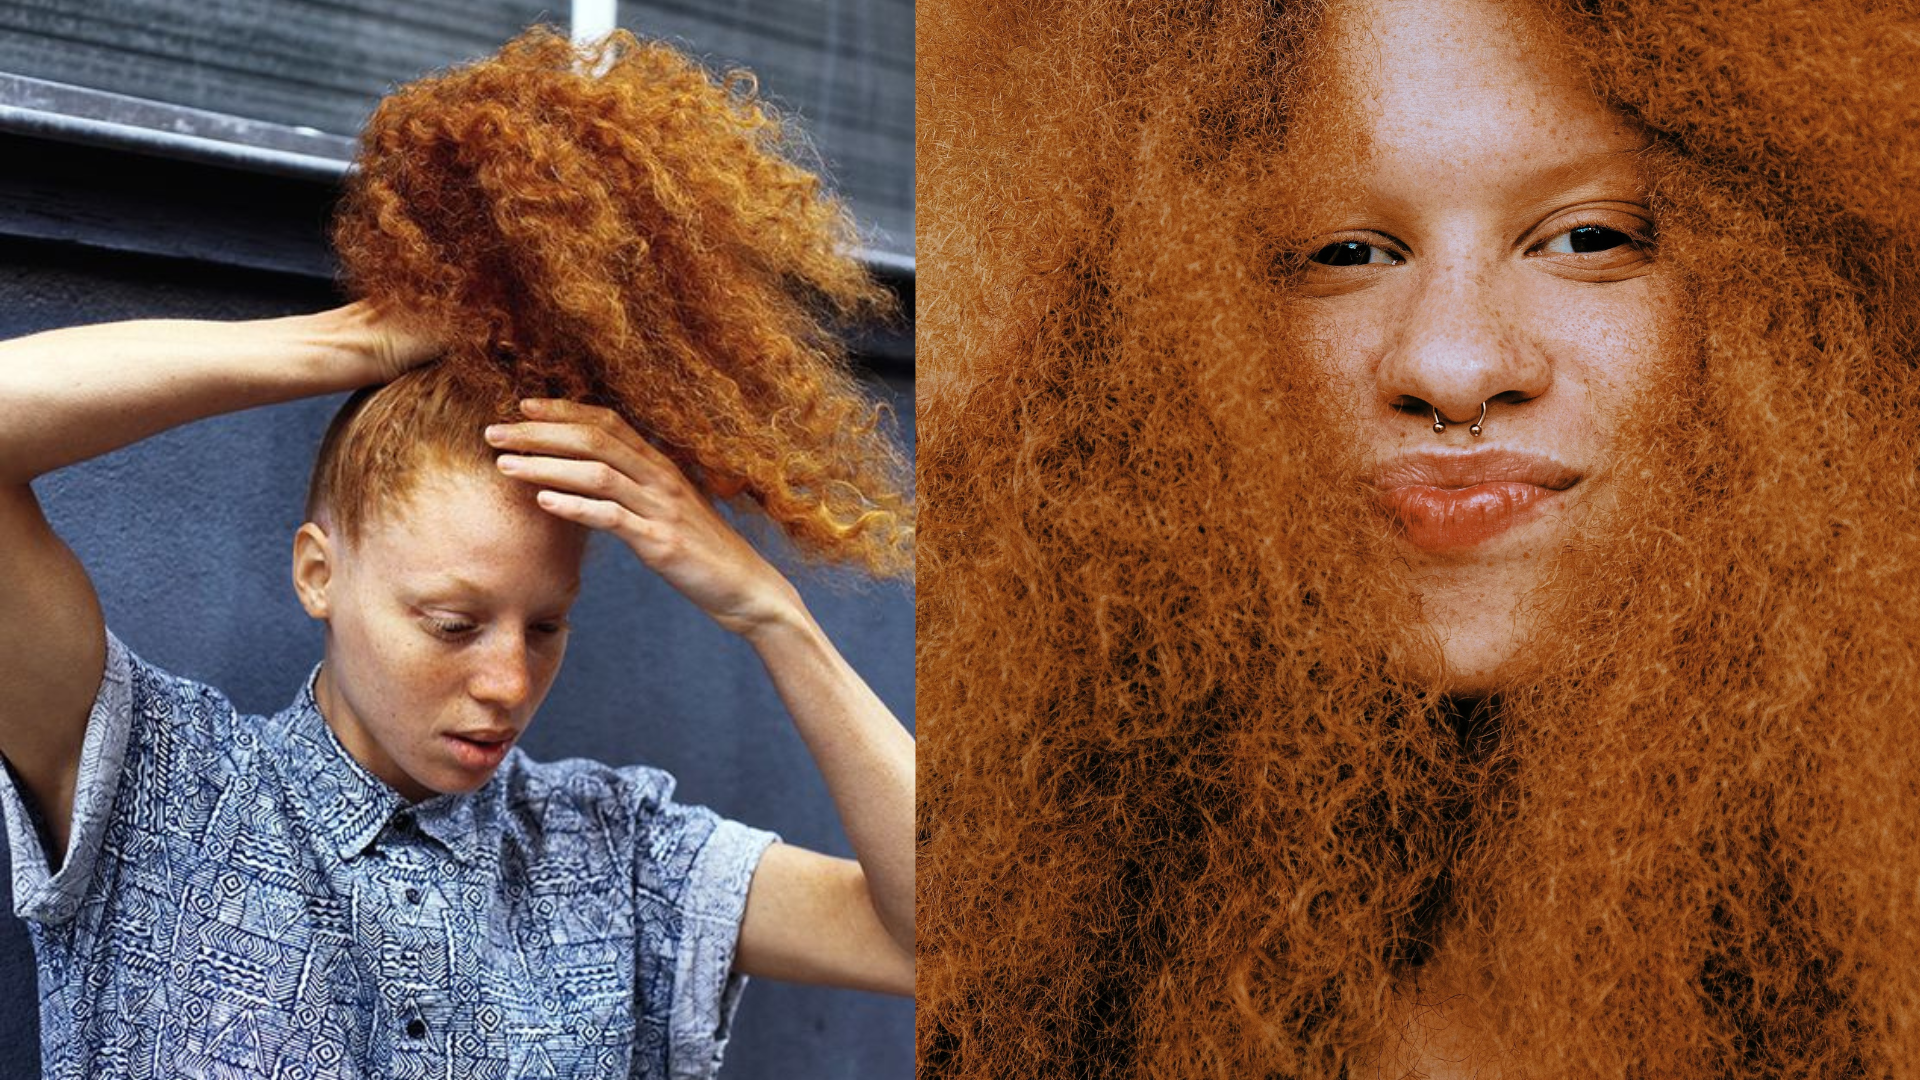 Can Black People Have Hair? - How to a Redhead